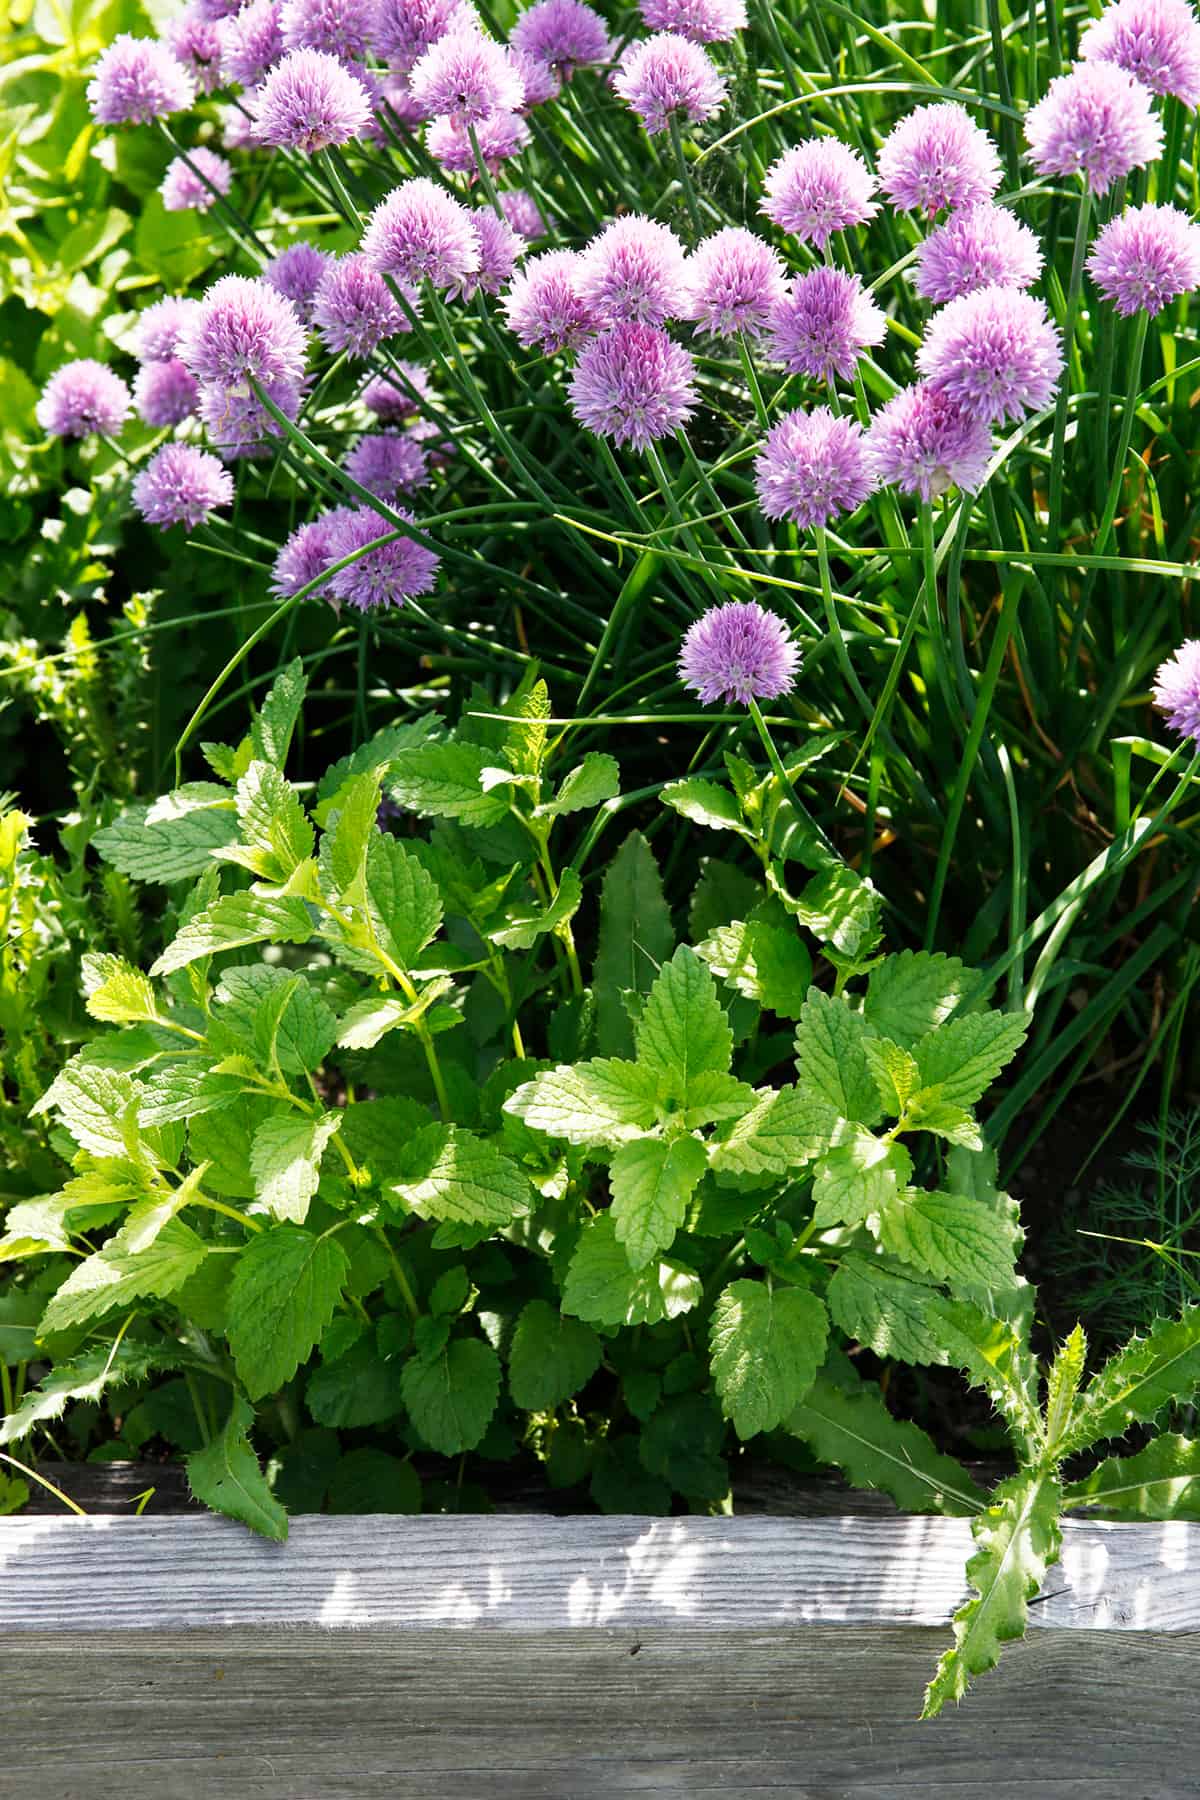 Chives and mint in a garden bed.